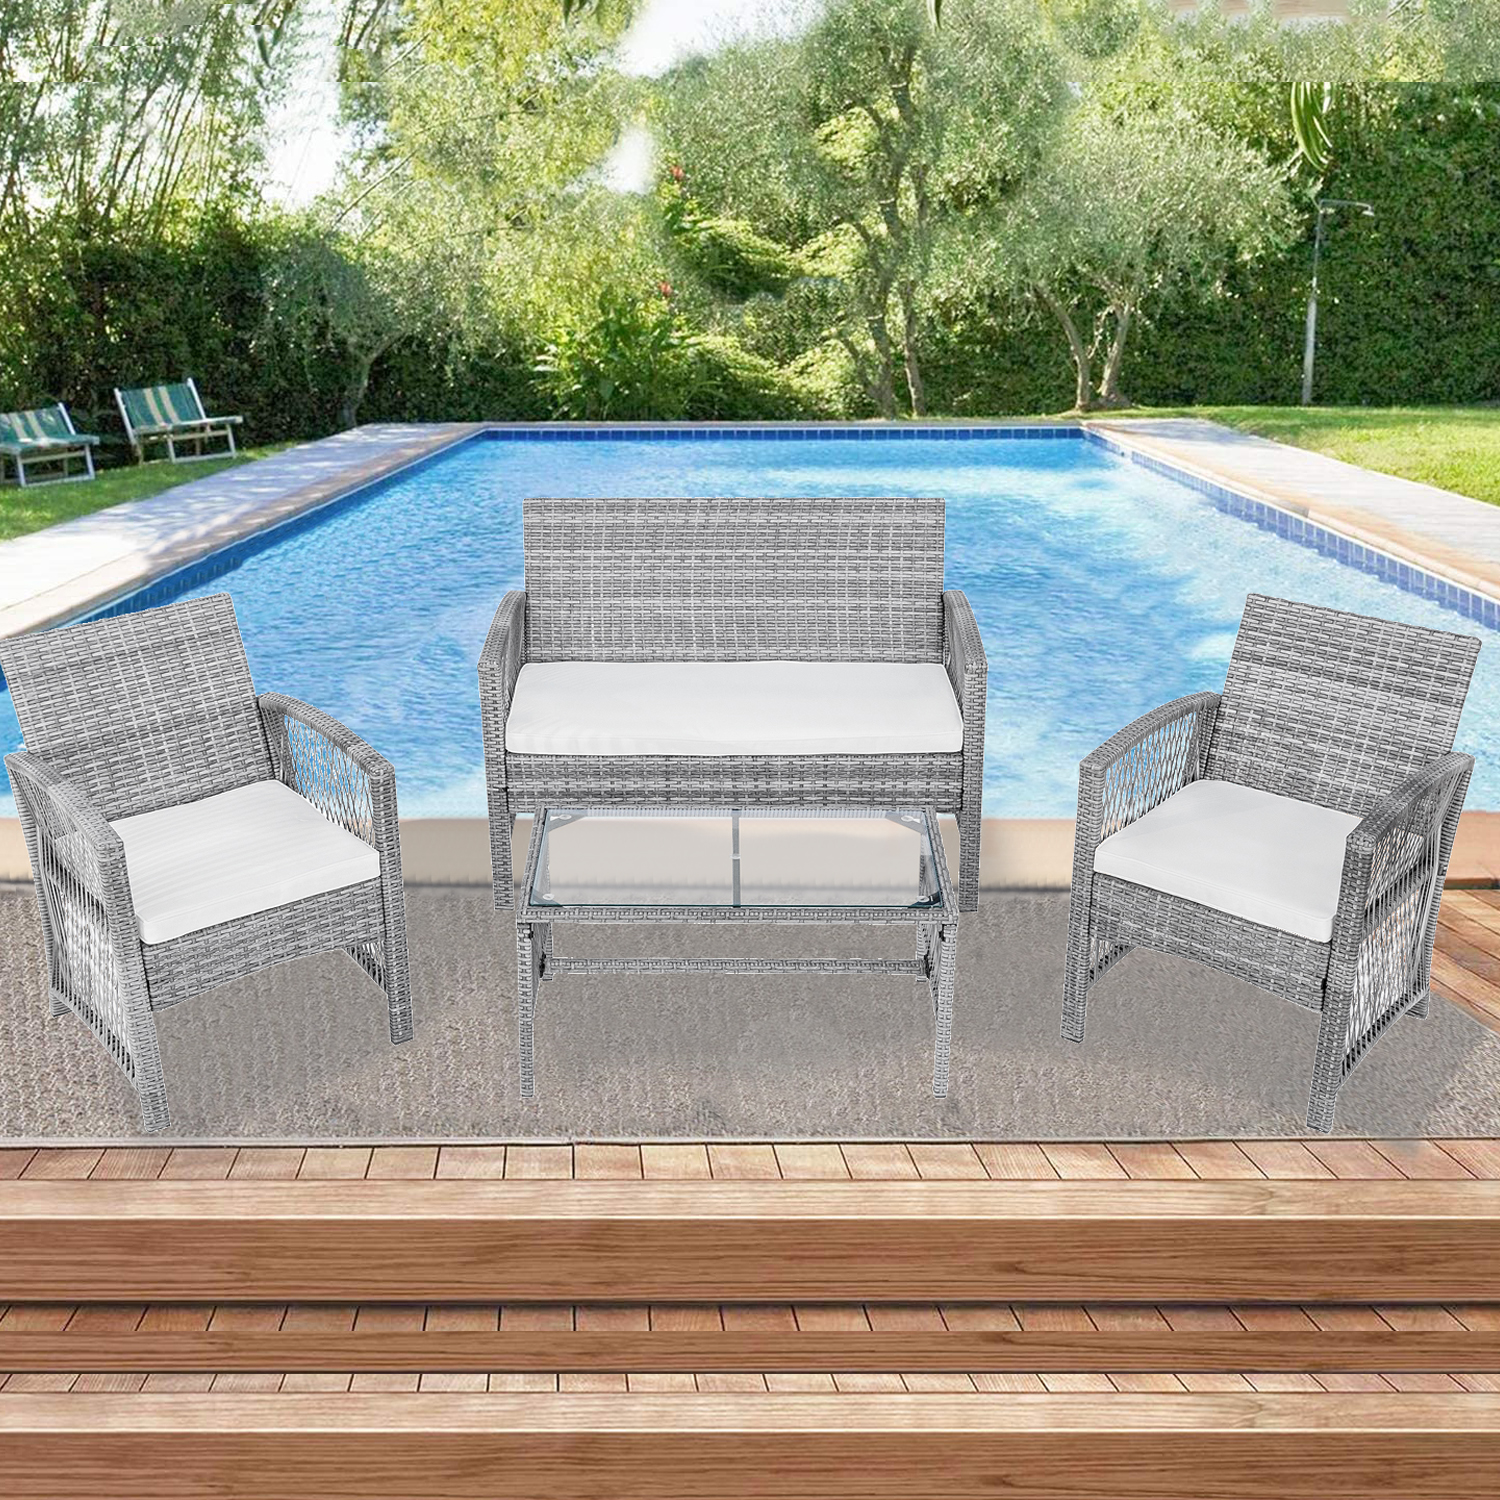 Rattan Patio Furniture Sets Clearance, 4 Piece Outdoor Conversation Sets, Wicker Bar Set with 2 Arm Chairs,1 Loveseat & Coffee Table, Patio Dining Sets for Backyard Porch Poolside Garden, Gray, W7782 - image 1 of 11